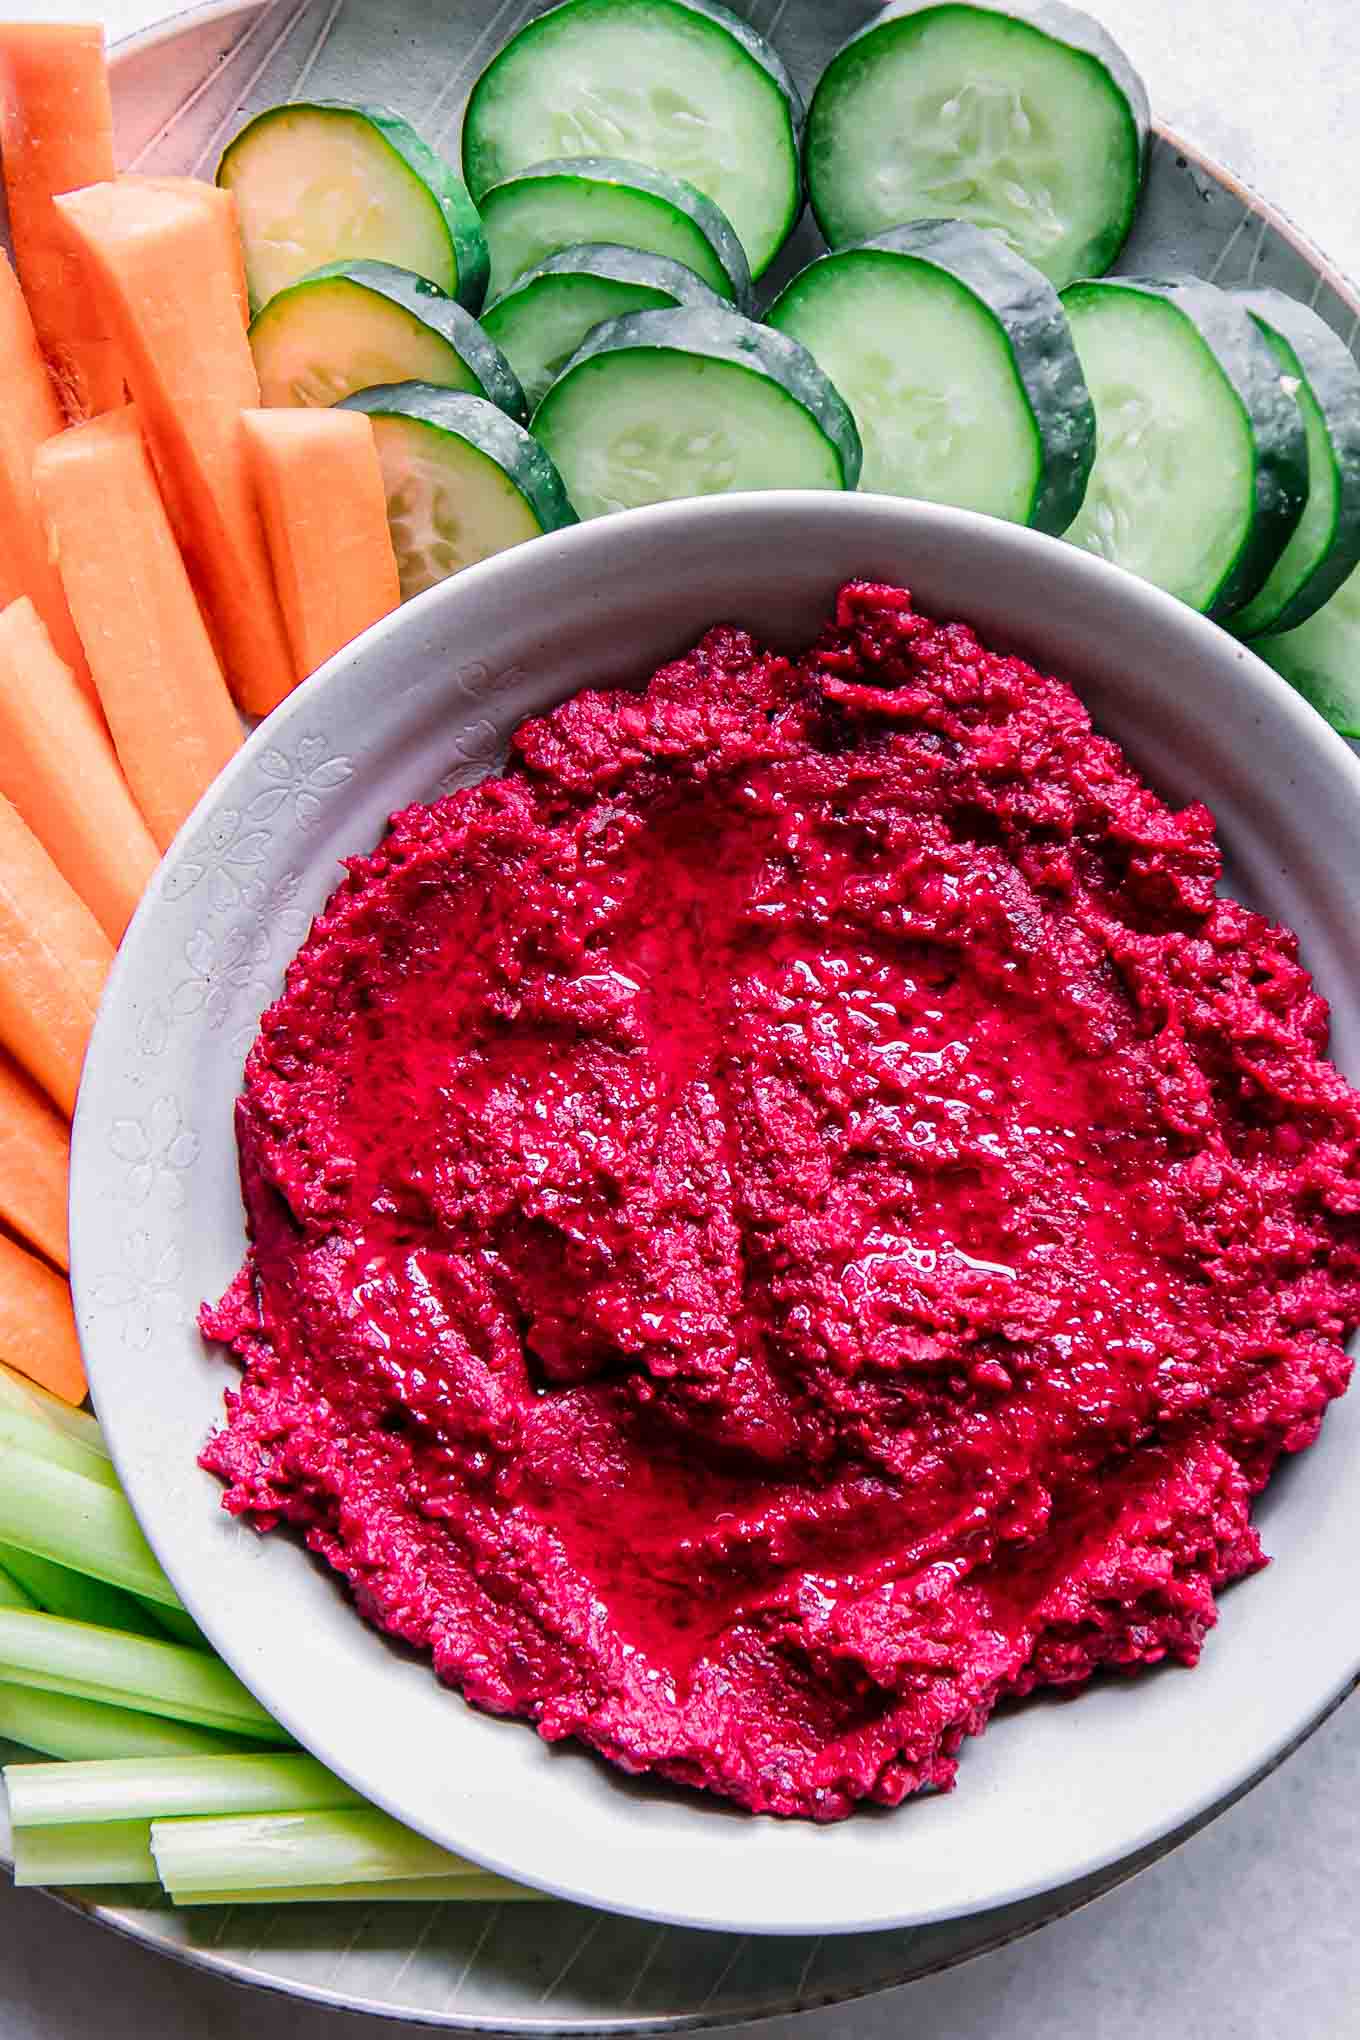 red beet hummus in a bowl with cut vegetables for dipping on a blue plate